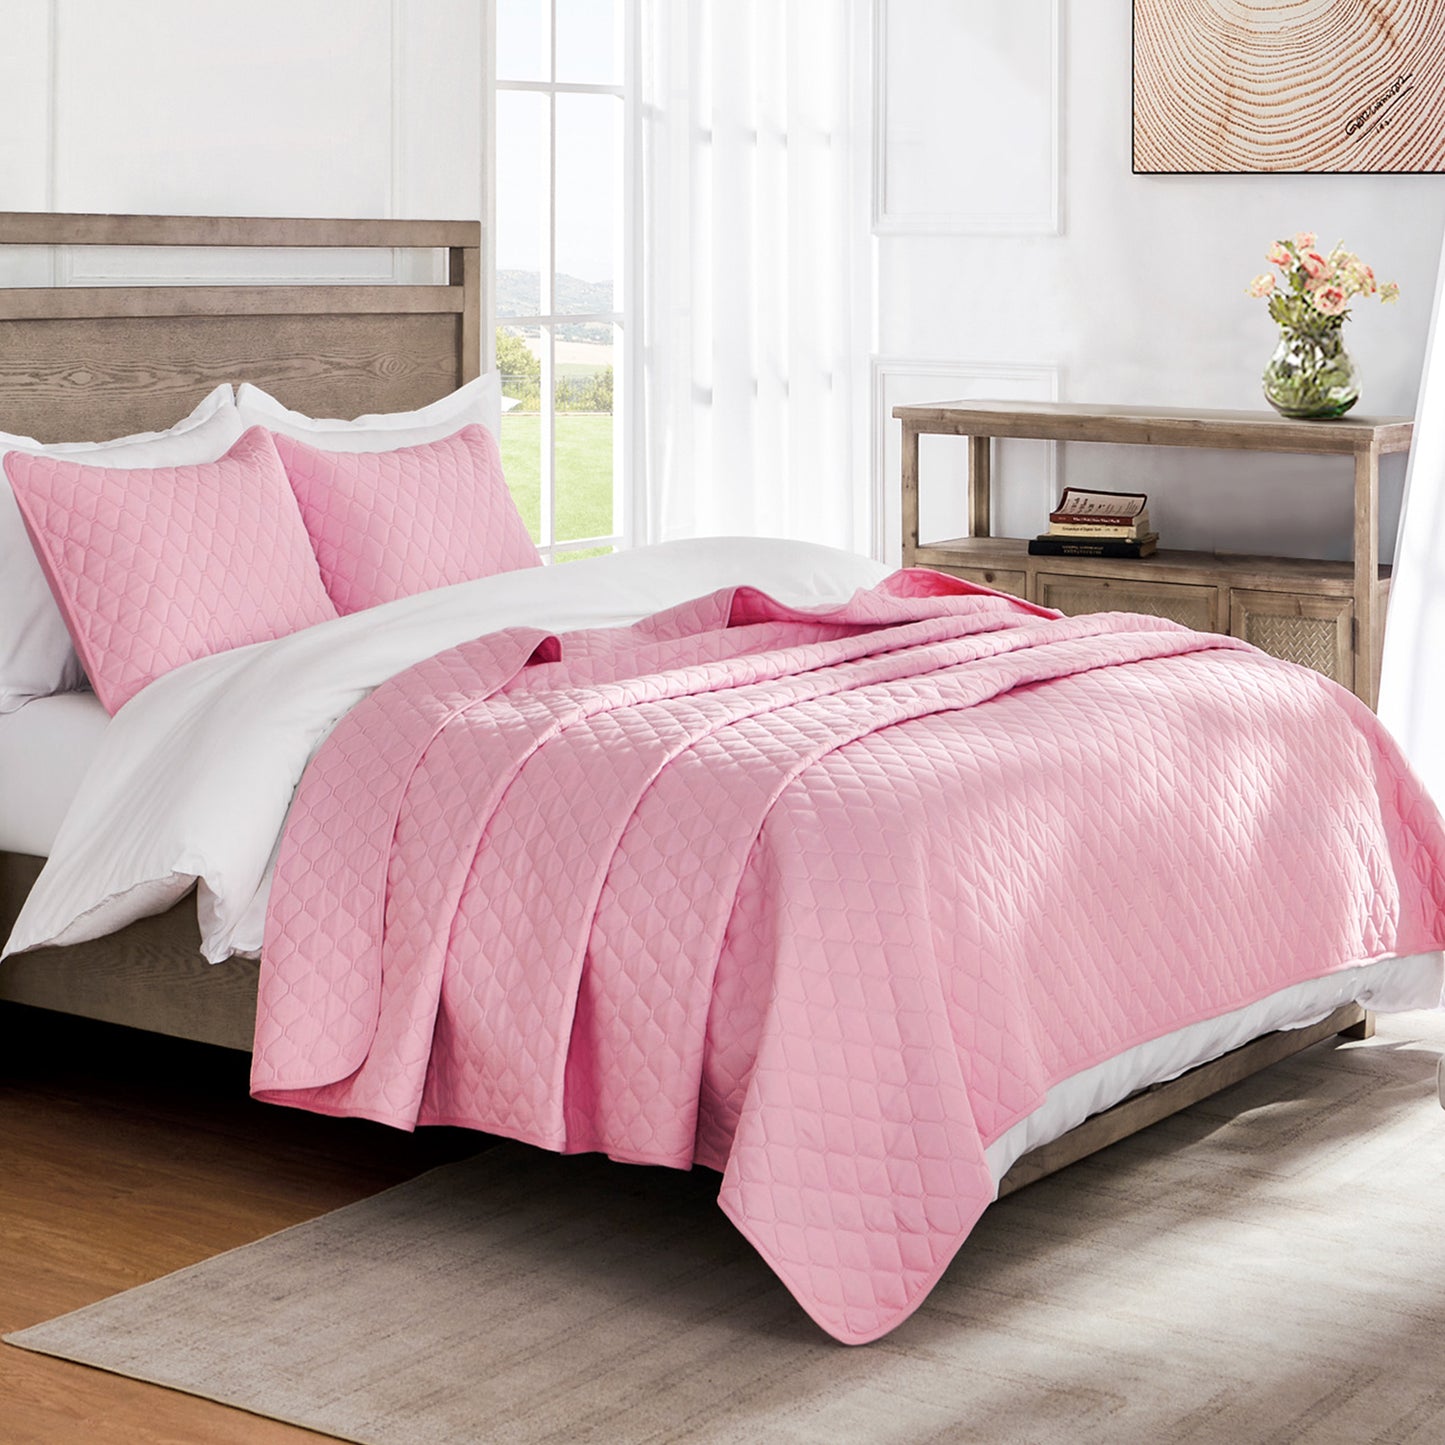 Exclusivo Mezcla Ultrasonic Reversible King Size Quilt Bedding Set with Pillow Shams, Lightweight Quilts King Size, Soft Bedspreads Bed Coverlets for All Seasons - (Bright Pink, 104"x96")